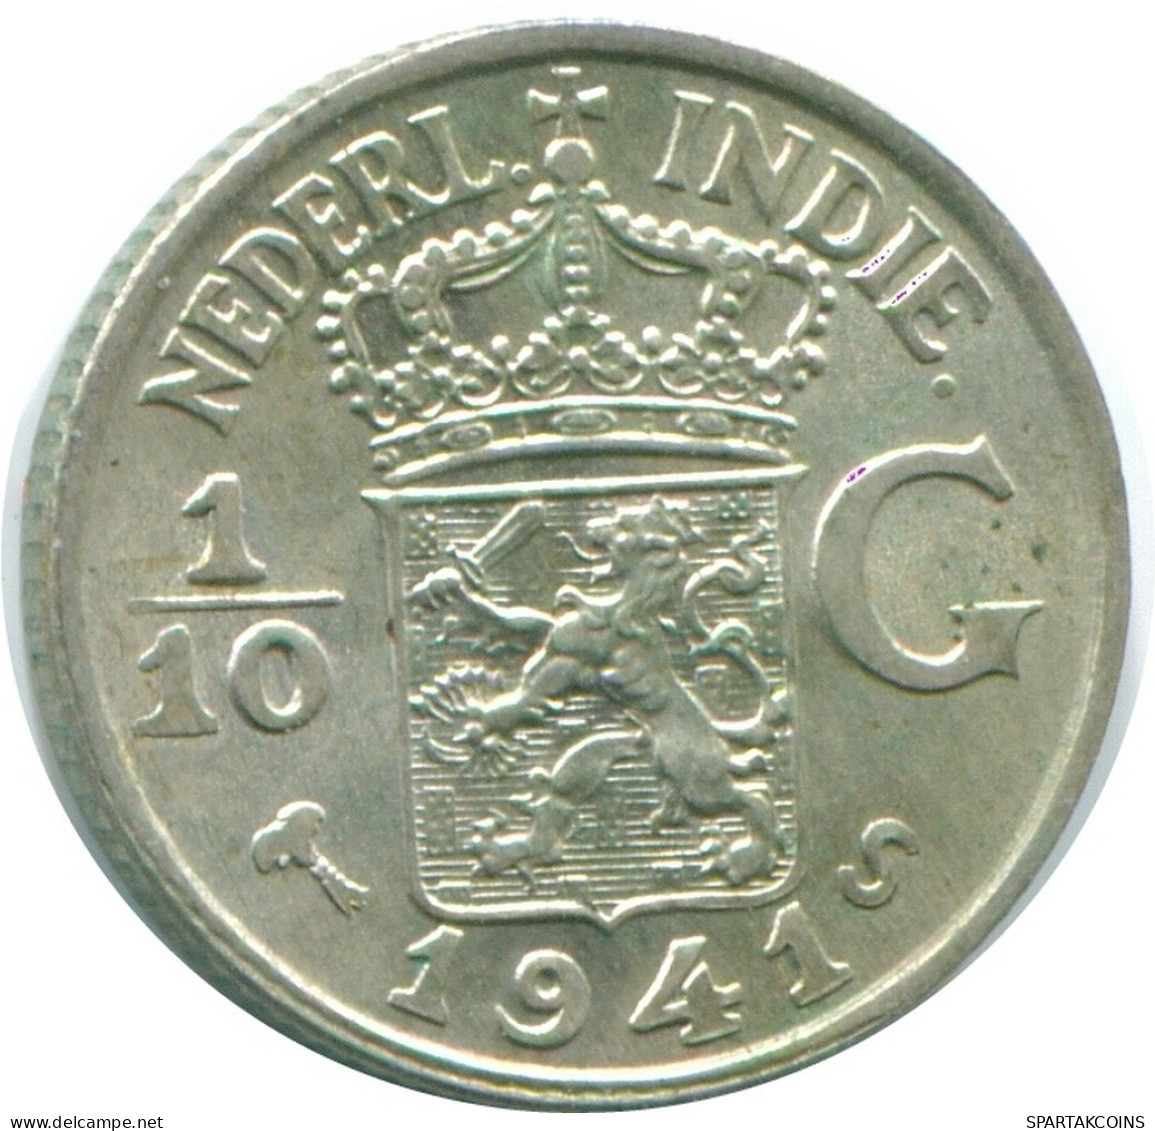 1/10 GULDEN 1941 S NETHERLANDS EAST INDIES SILVER Colonial Coin #NL13640.3.U.A - Dutch East Indies